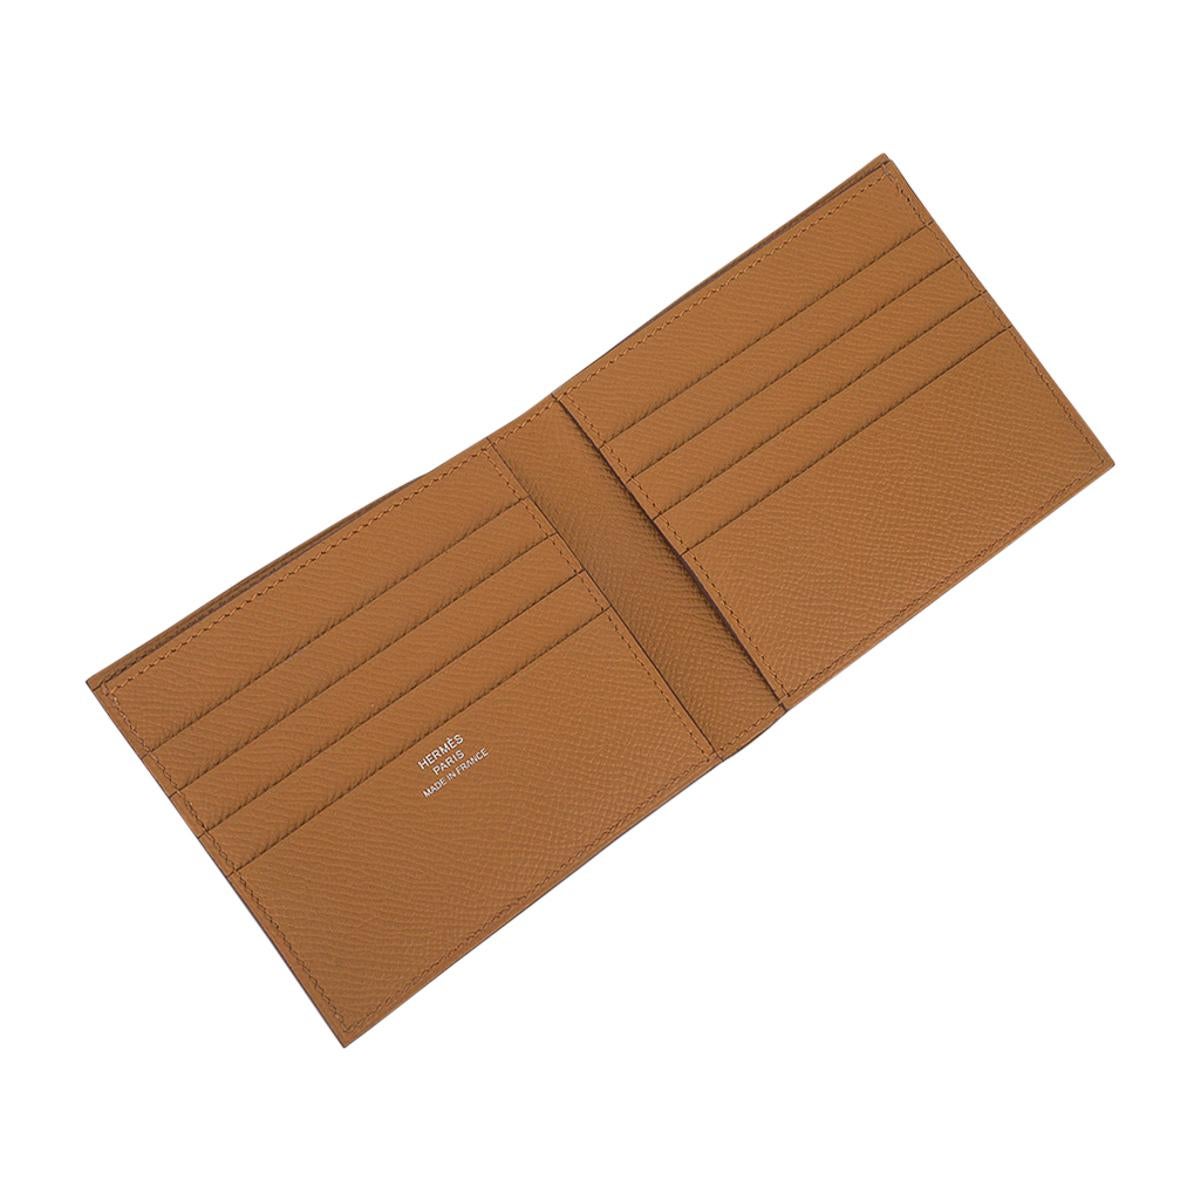 Mightychic offers an Hermes Men's MC2 Copernic compact bi-fold wallet featured in Sesame.
Light and slim in Epsom leather.
Interior has eight credit card slots, two flat pockets and one paper money slot.
Sleek clean lines.
HERMES Paris Made in